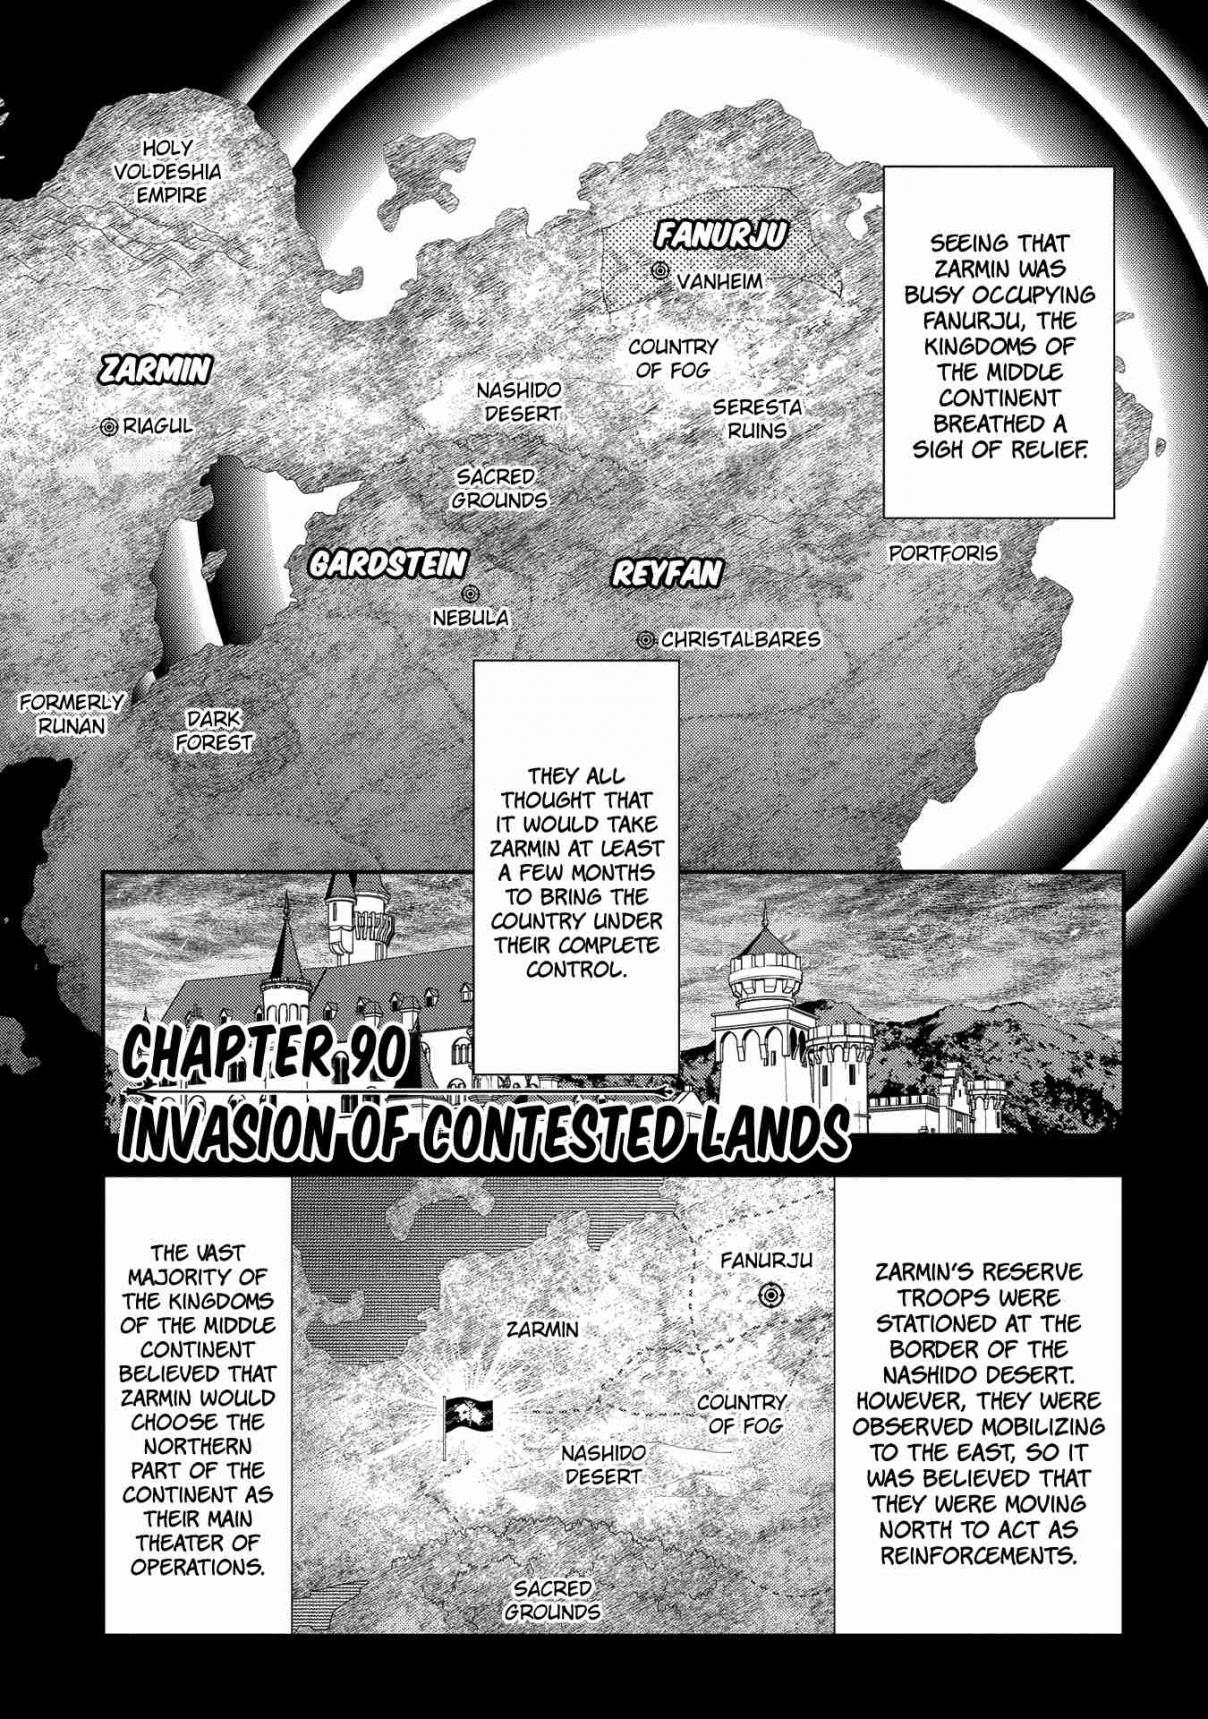 Rain Vol. 17 Ch. 90 Invasion of contested lands